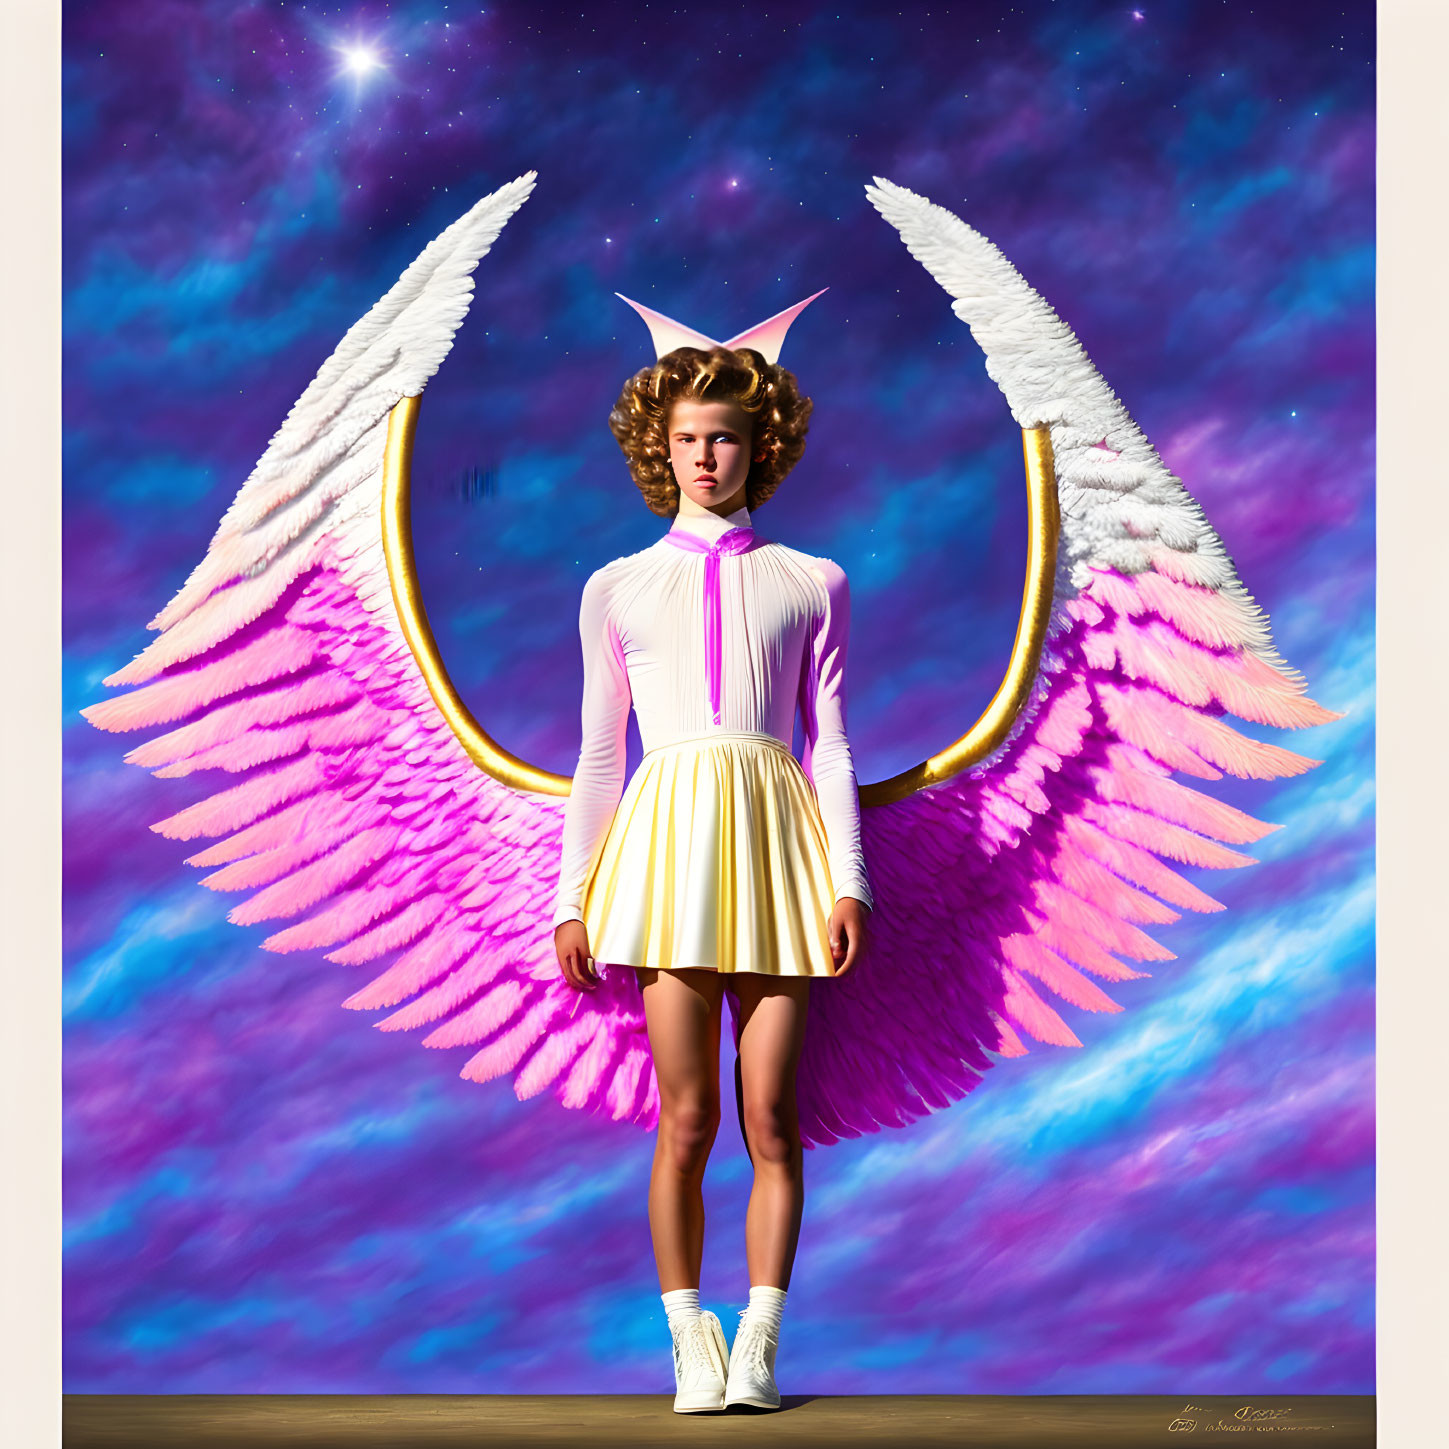 Surreal artwork of woman with pink-white angelic wings and Aries zodiac headpiece